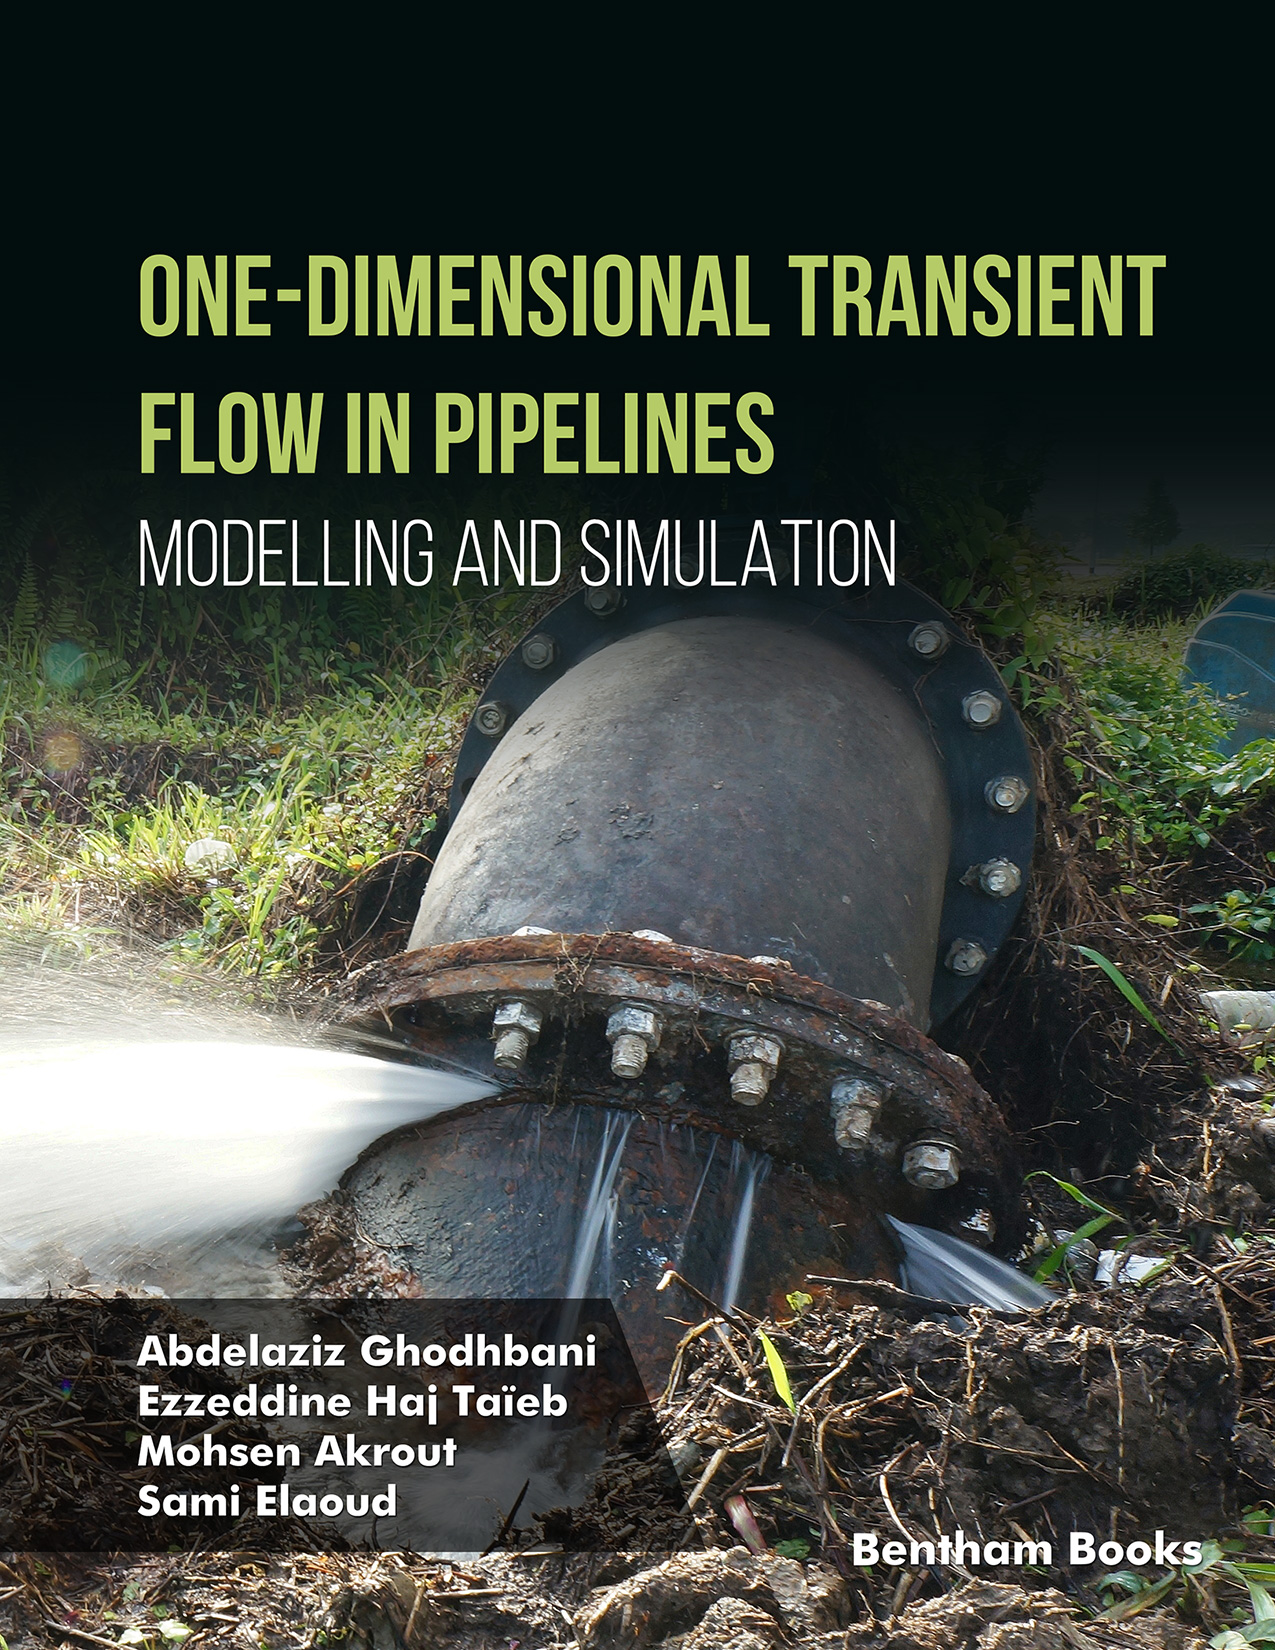 One-Dimensional Transient Flow in Pipelines Modelling and Simulation